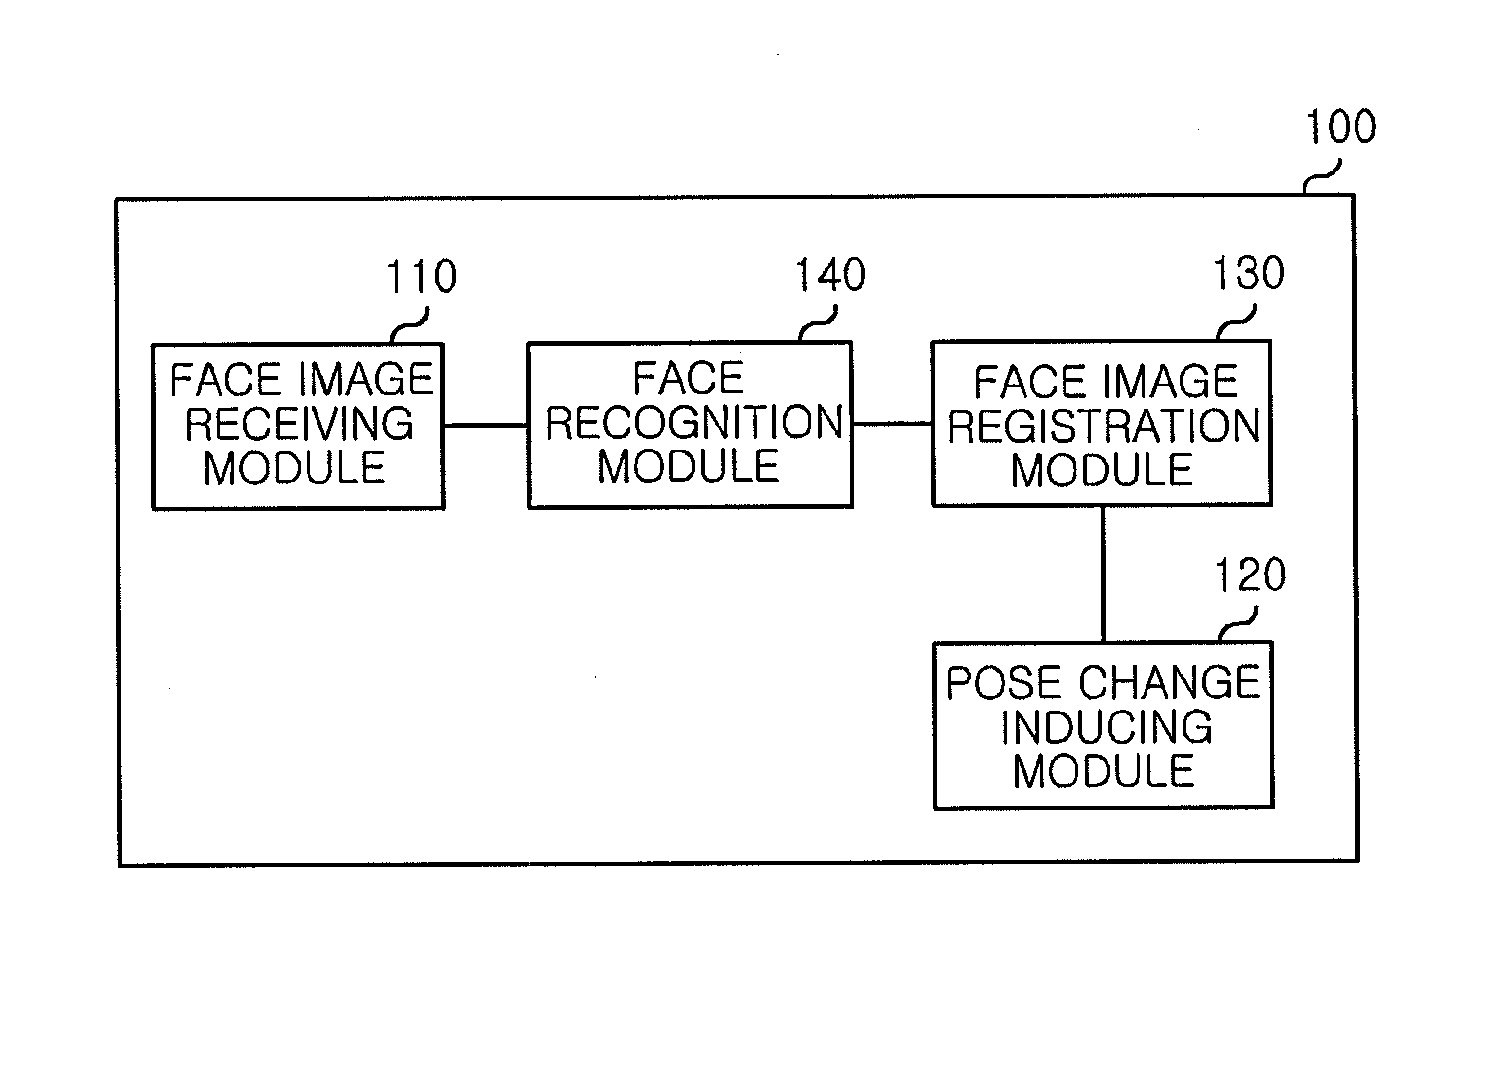 Method and apparatus for registering face images, and apparatus for inducing pose change, and apparatus for recognizing faces